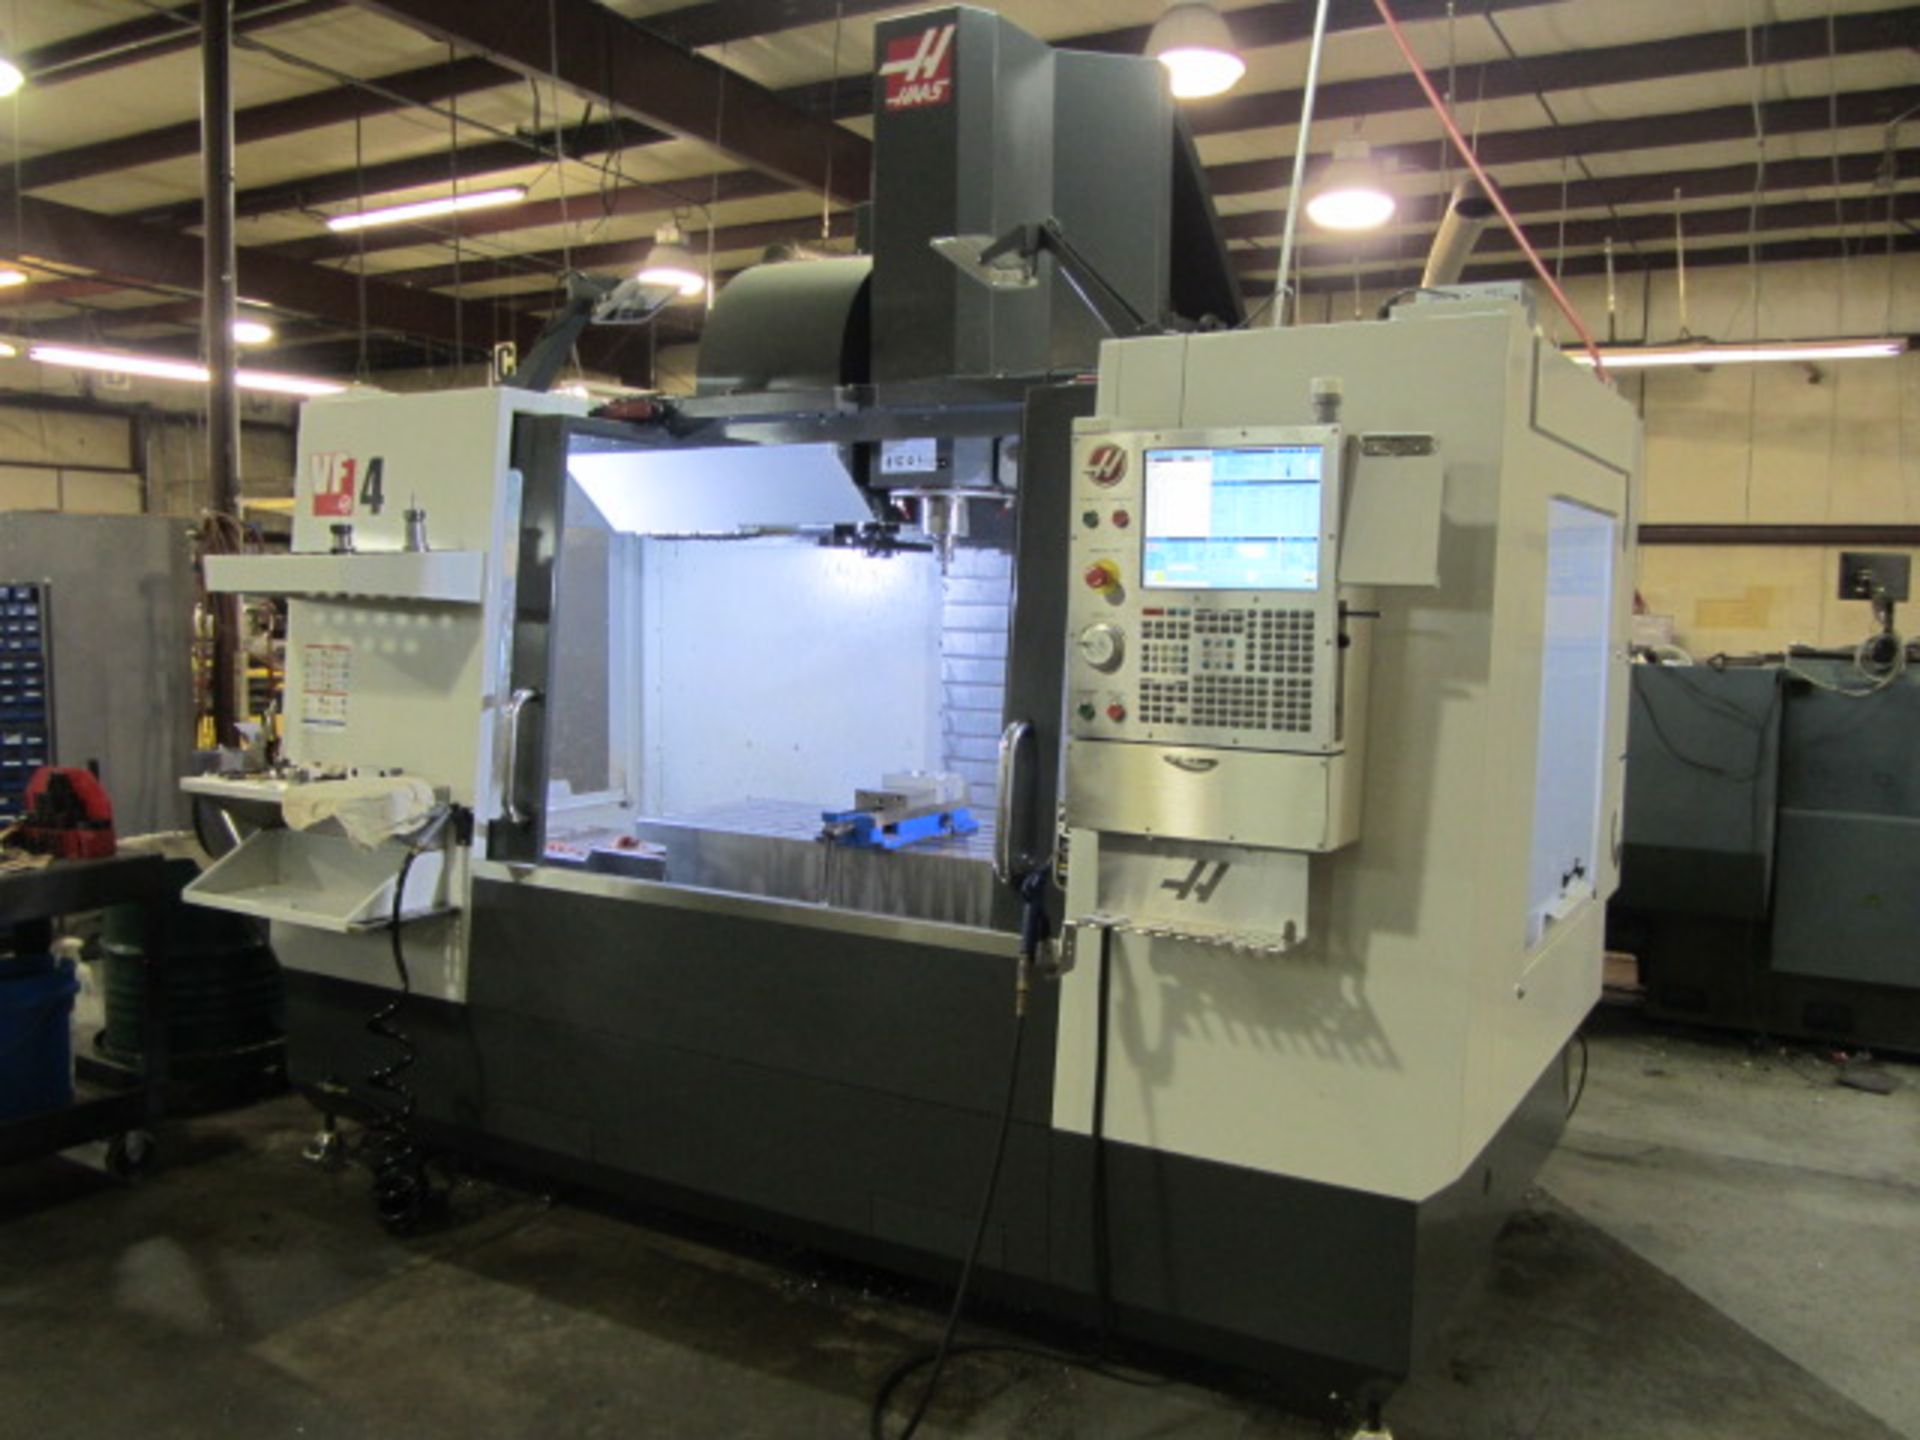 Haas VF-4 CNC Vertical Machining Center with 52'' x 20'' Table, #40 Taper Spindle Speeds to 8100 - Image 2 of 8